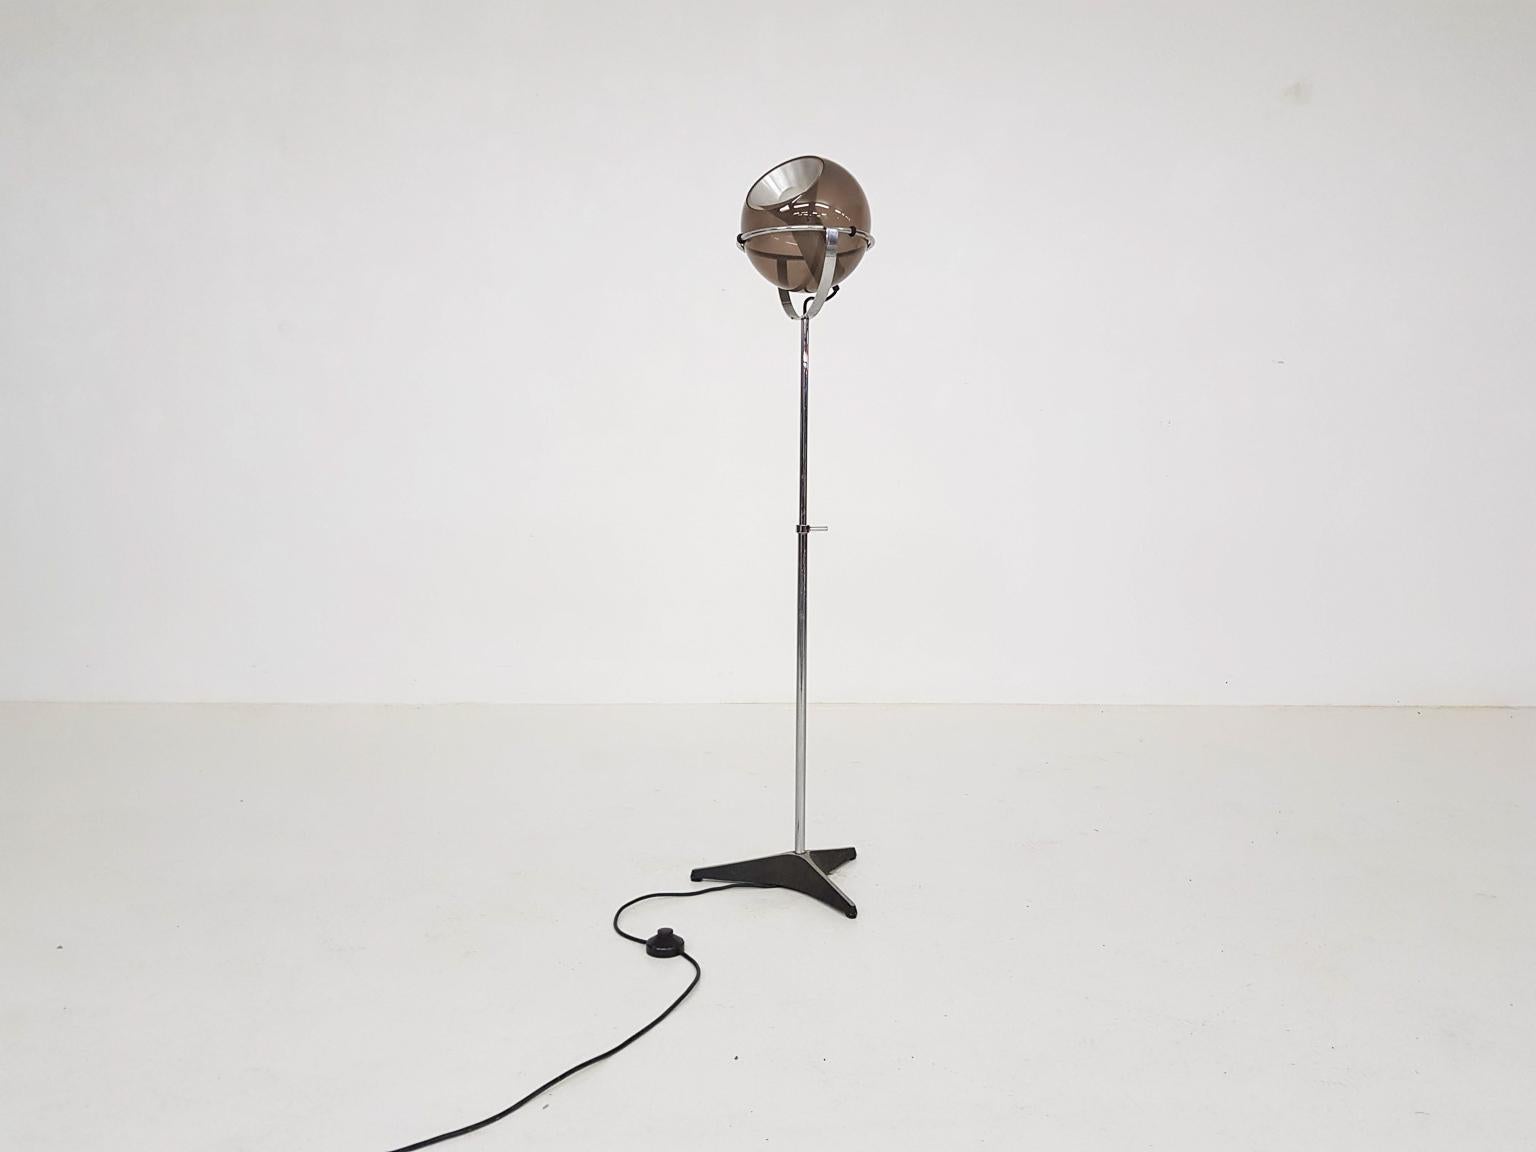 Brown glass globe floor lamp by Frank Ligtelijn for RAAK, Dutch design 1961.

Beautiful floor lamp from RAAK. The floor lamp features a glass globe on a metal stand. Because the globe rests in the stand, it can positioned in various angles. The